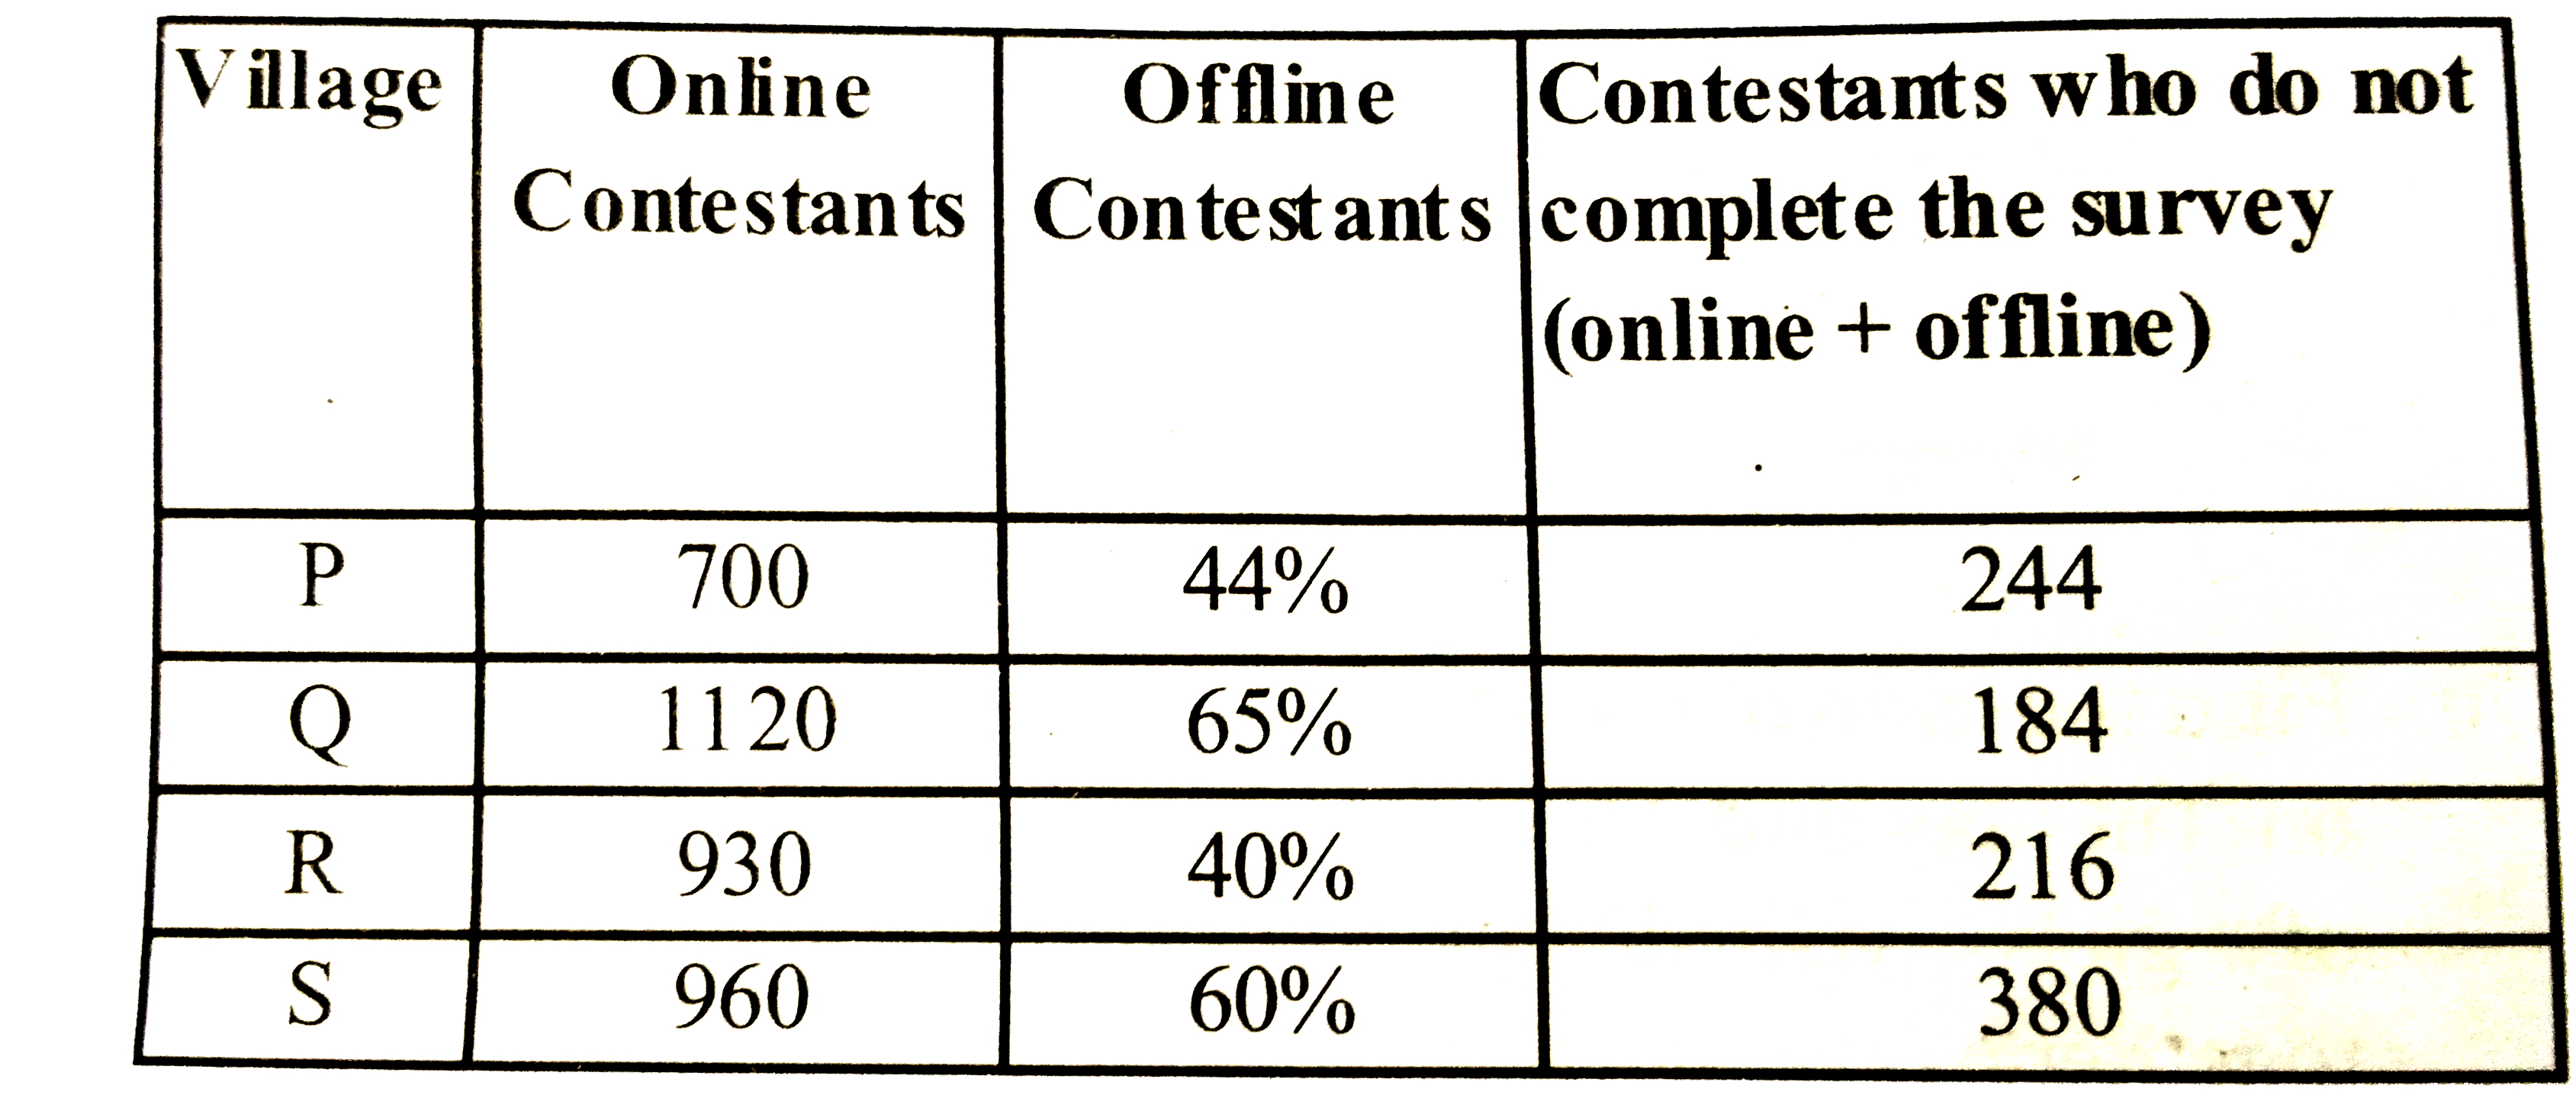 The table shows the online and offline contestants takin part in a survey from four villages and total contestant who hae not completed the survey (online and offline)   Note 1:  Total contestants in a villages= Online onstestants+ Offline contestants   2 : Total contestants in a village = Constestant who complete the survey + contestants who do not complete survery      Find sum of the difference between total number of online and offline contestants who participated in the survey from all four village.